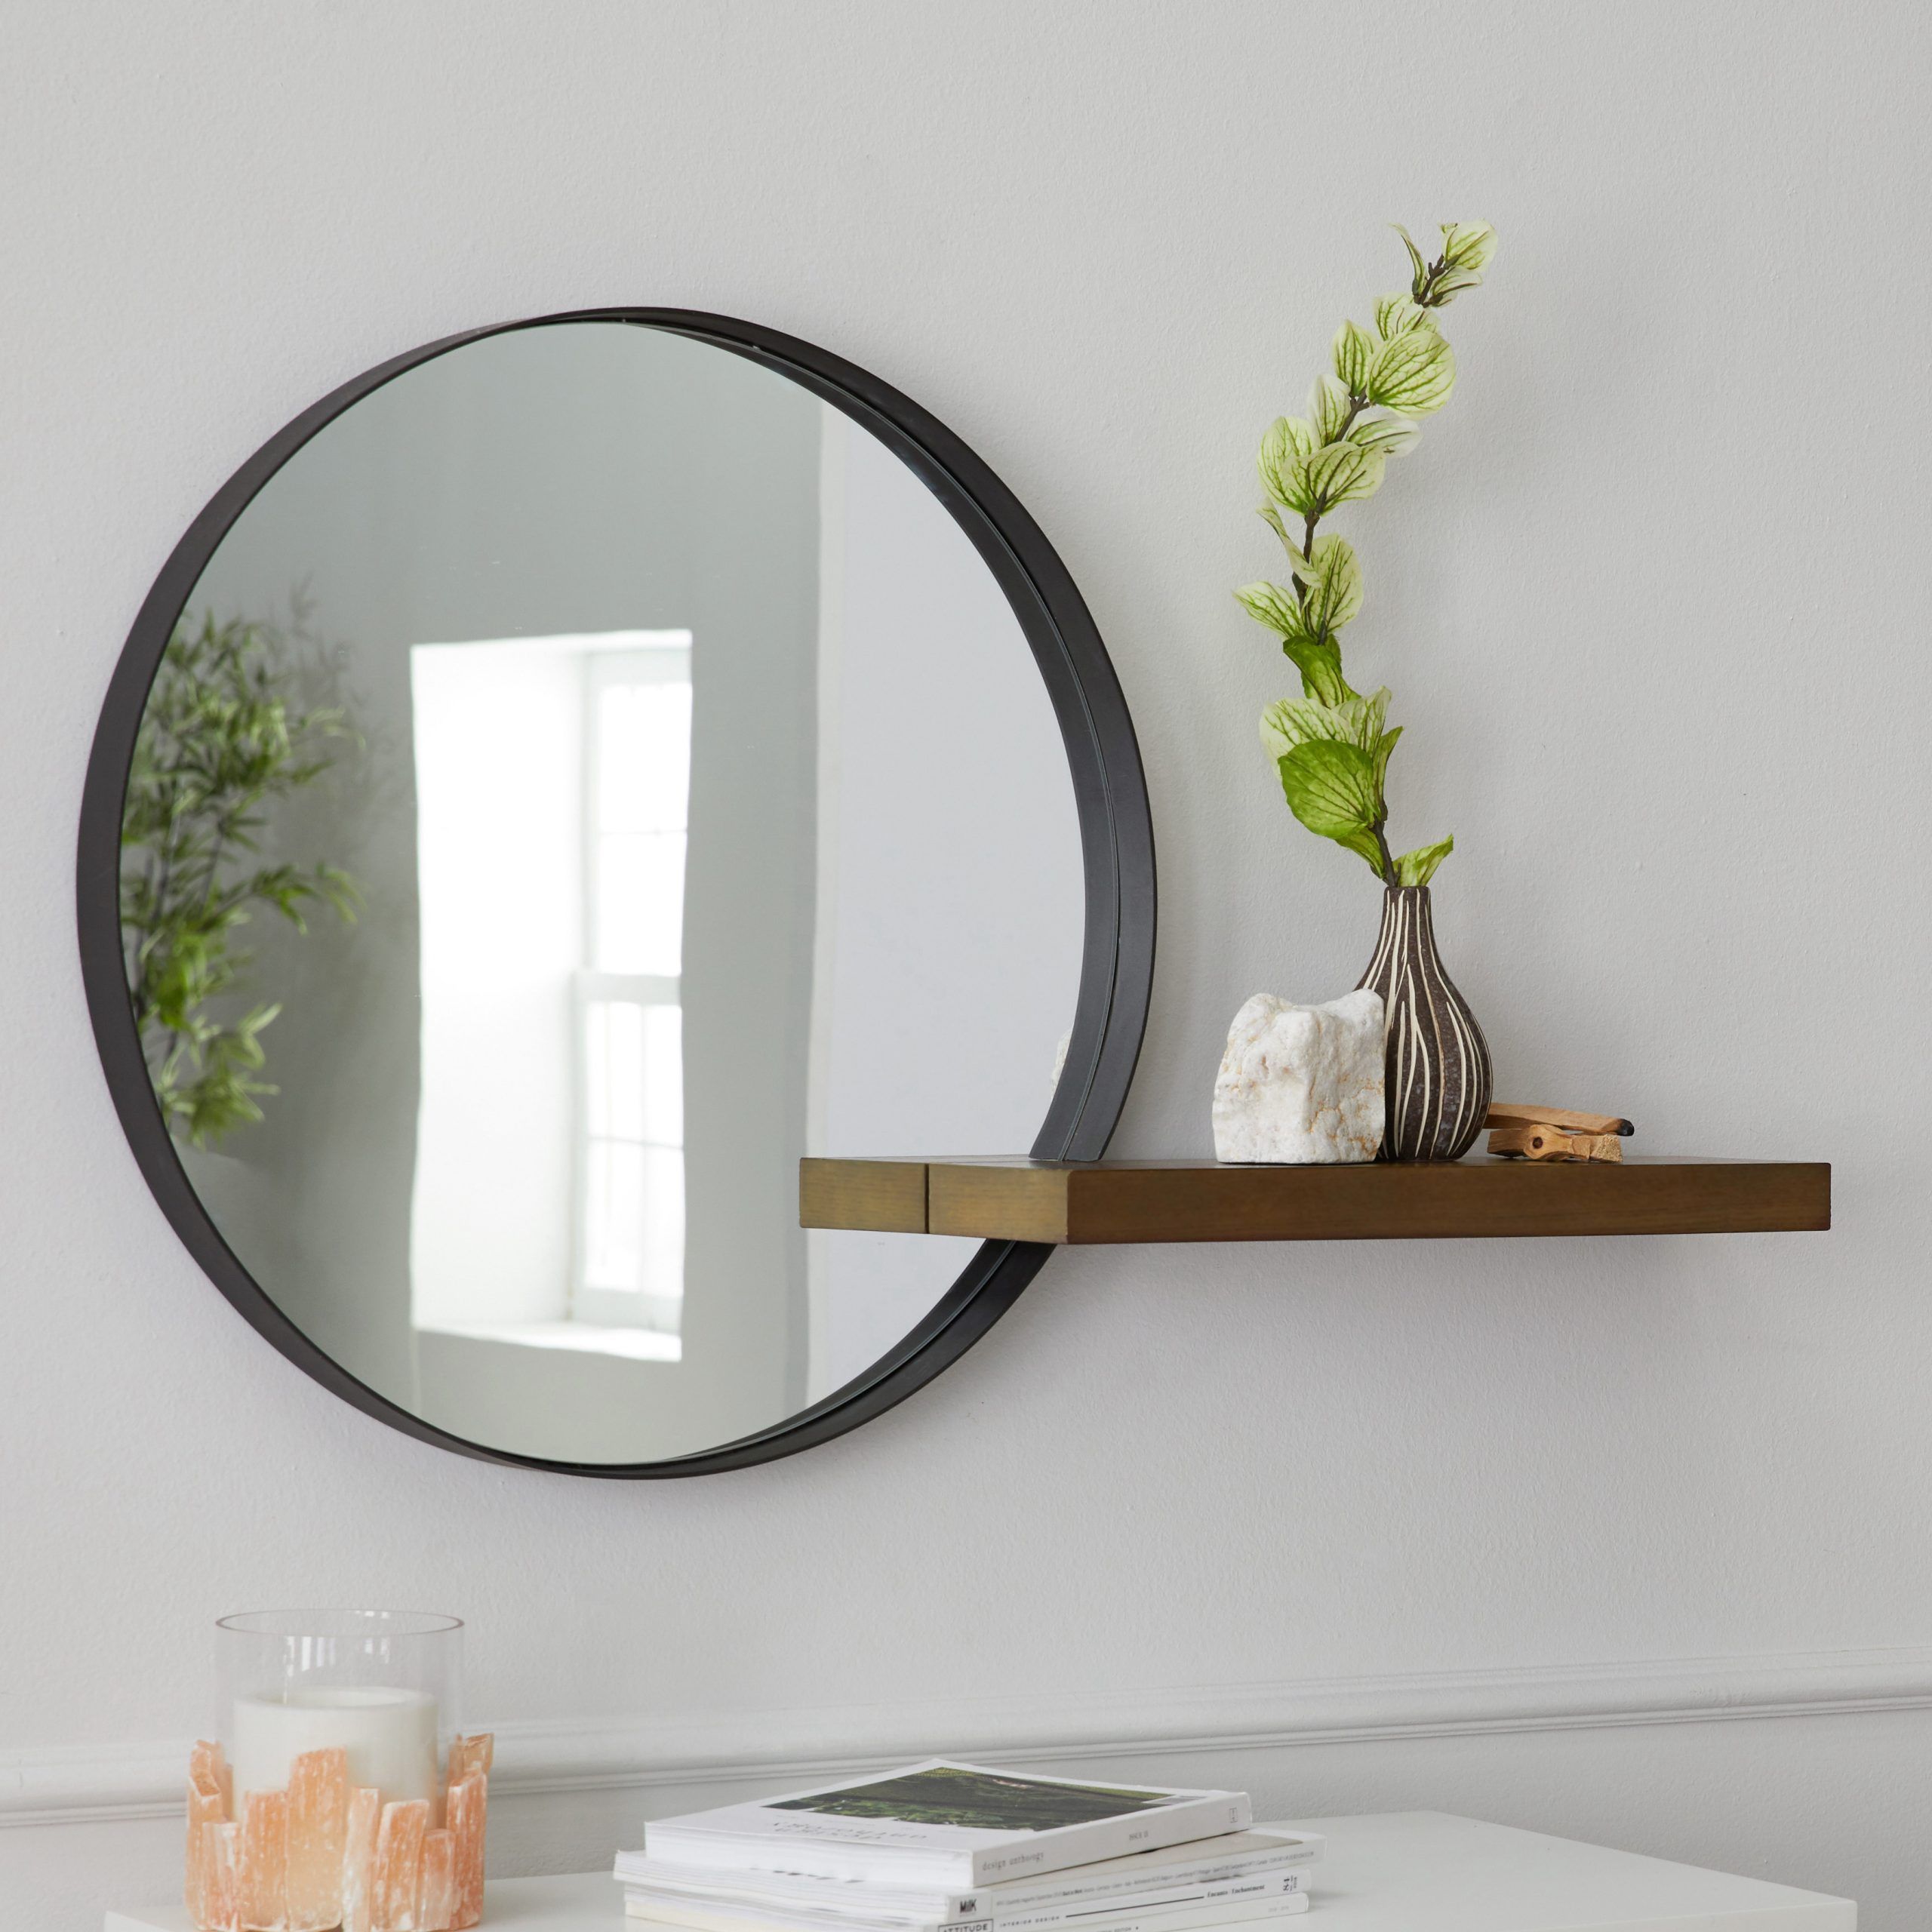 Modrn Naturals Metal Framed Round Decorative Wall Mirror With Wood With Reba Accent Wall Mirrors (View 3 of 15)